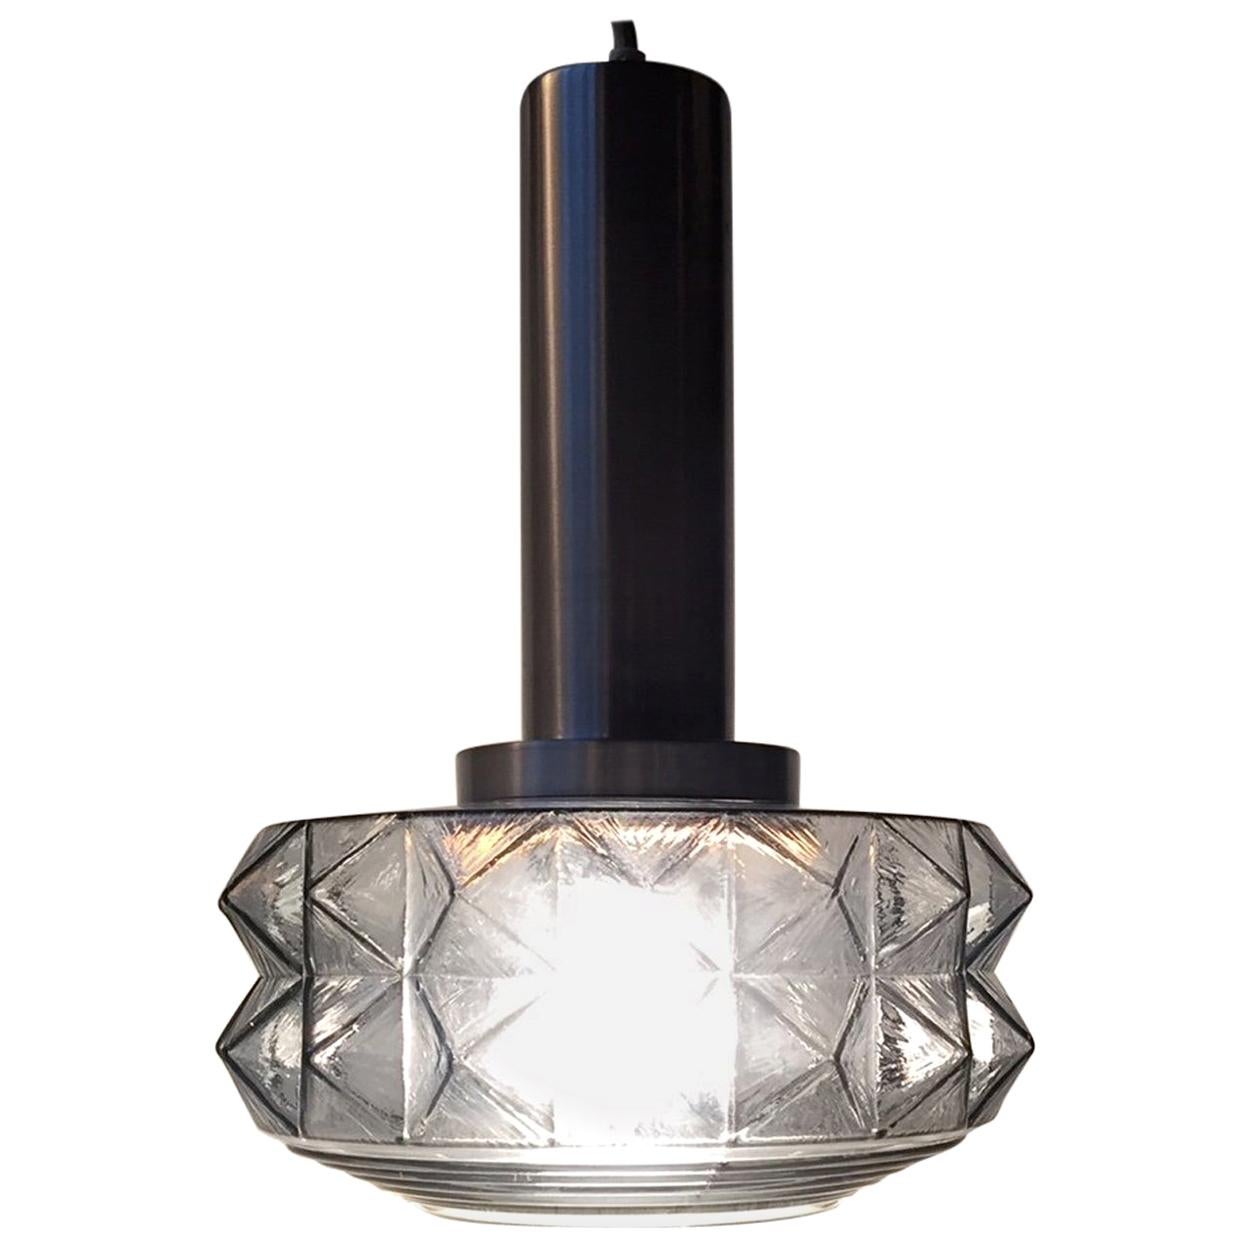 Midcentury Danish Ceiling Lamp in Smoke Glass from Vitrika, 1960s For Sale